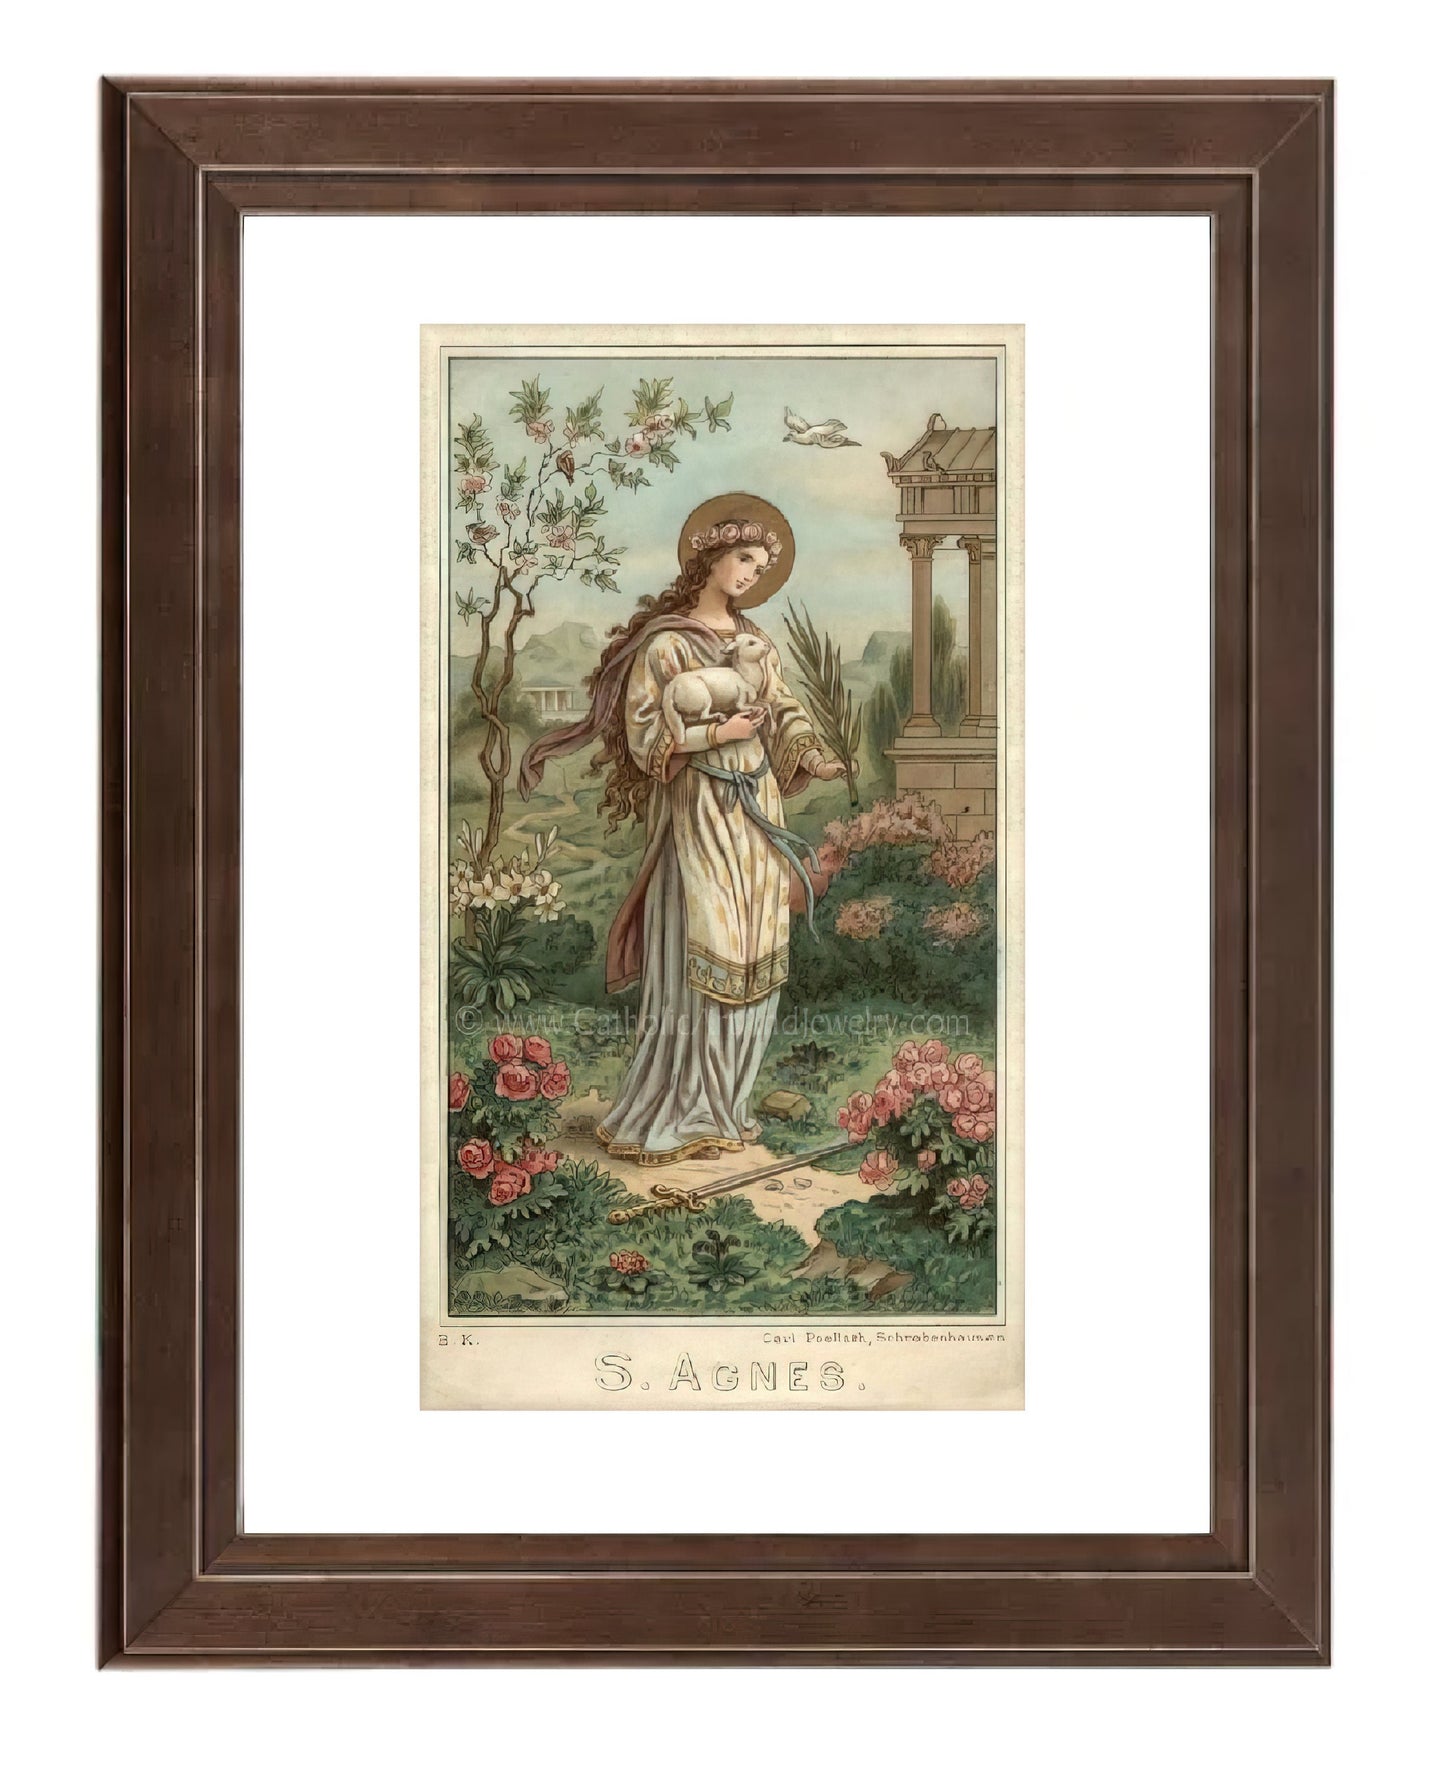 St. Agnes of Rome – 3 sizes – Based on a Vintage Holy Card